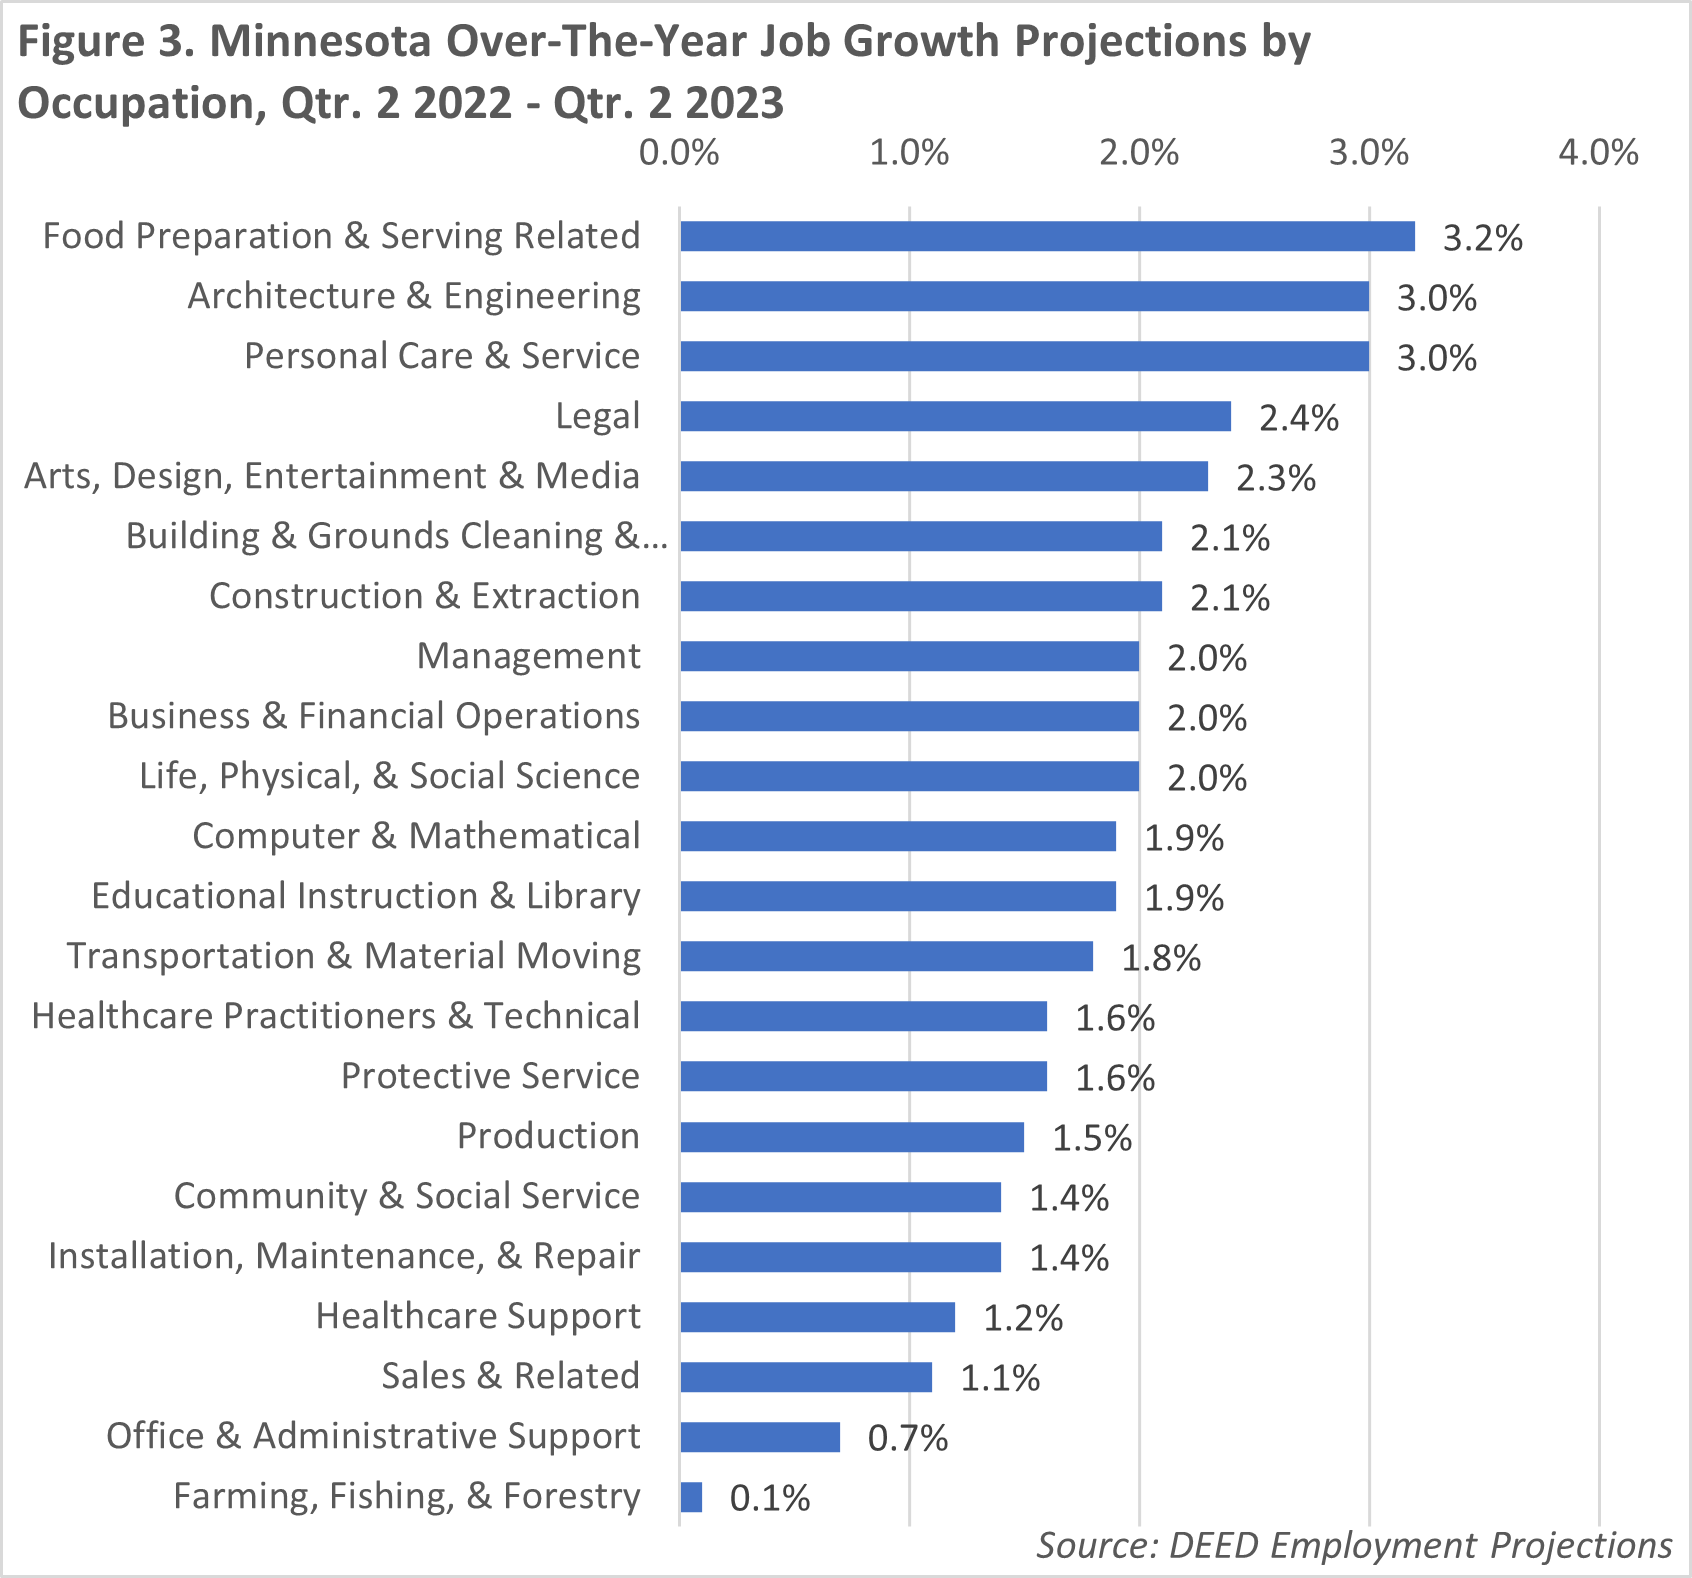 Minnesota Over-the-Year Job Growth Projections by Occupation